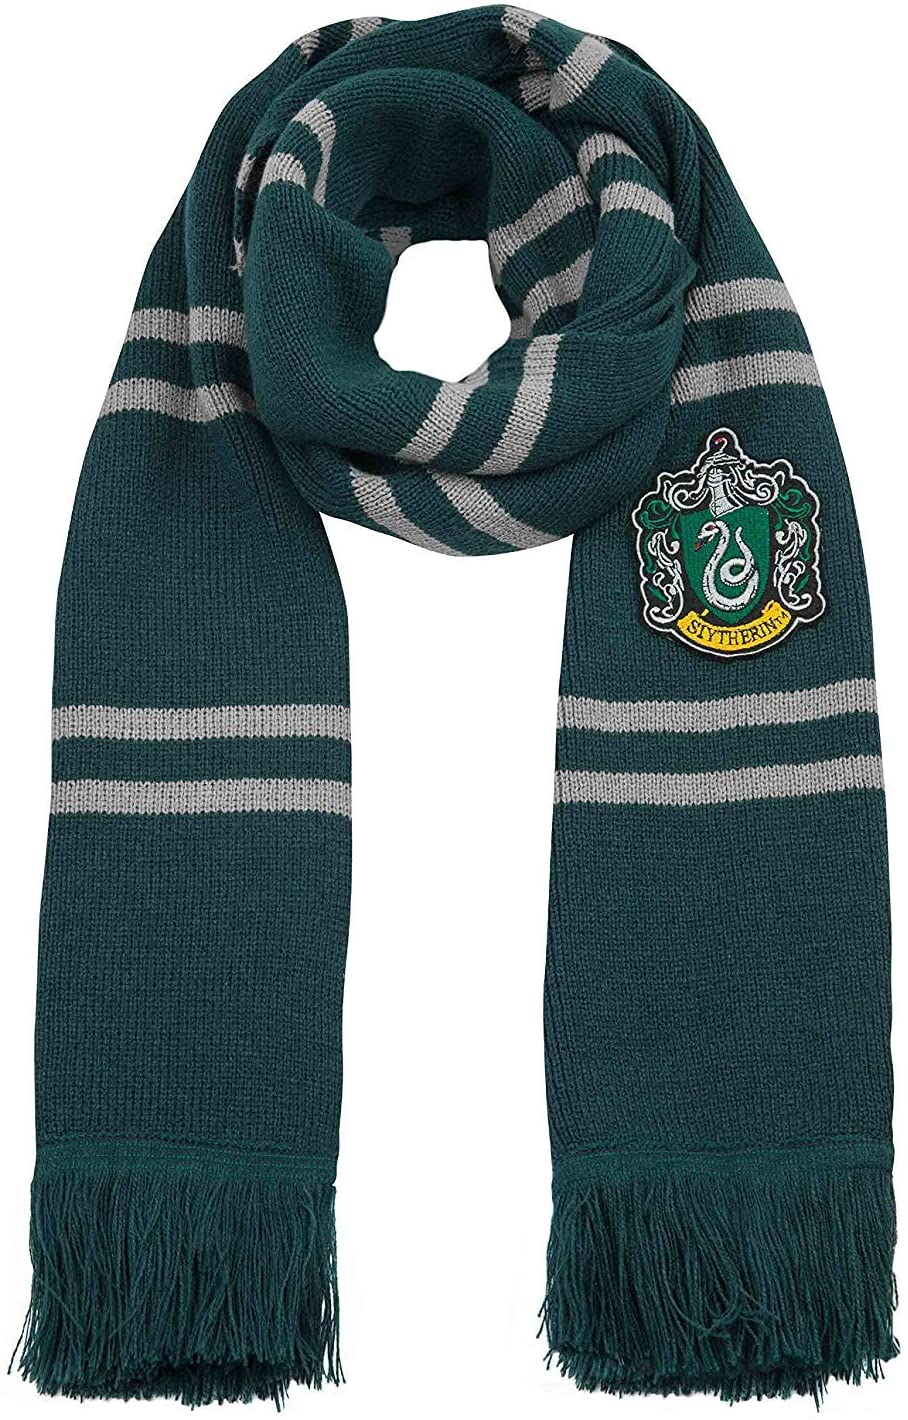 Cap Hat Soft Warm Costume Gift 2pcs Harry Potter Slytherin House Cosplay Scarf